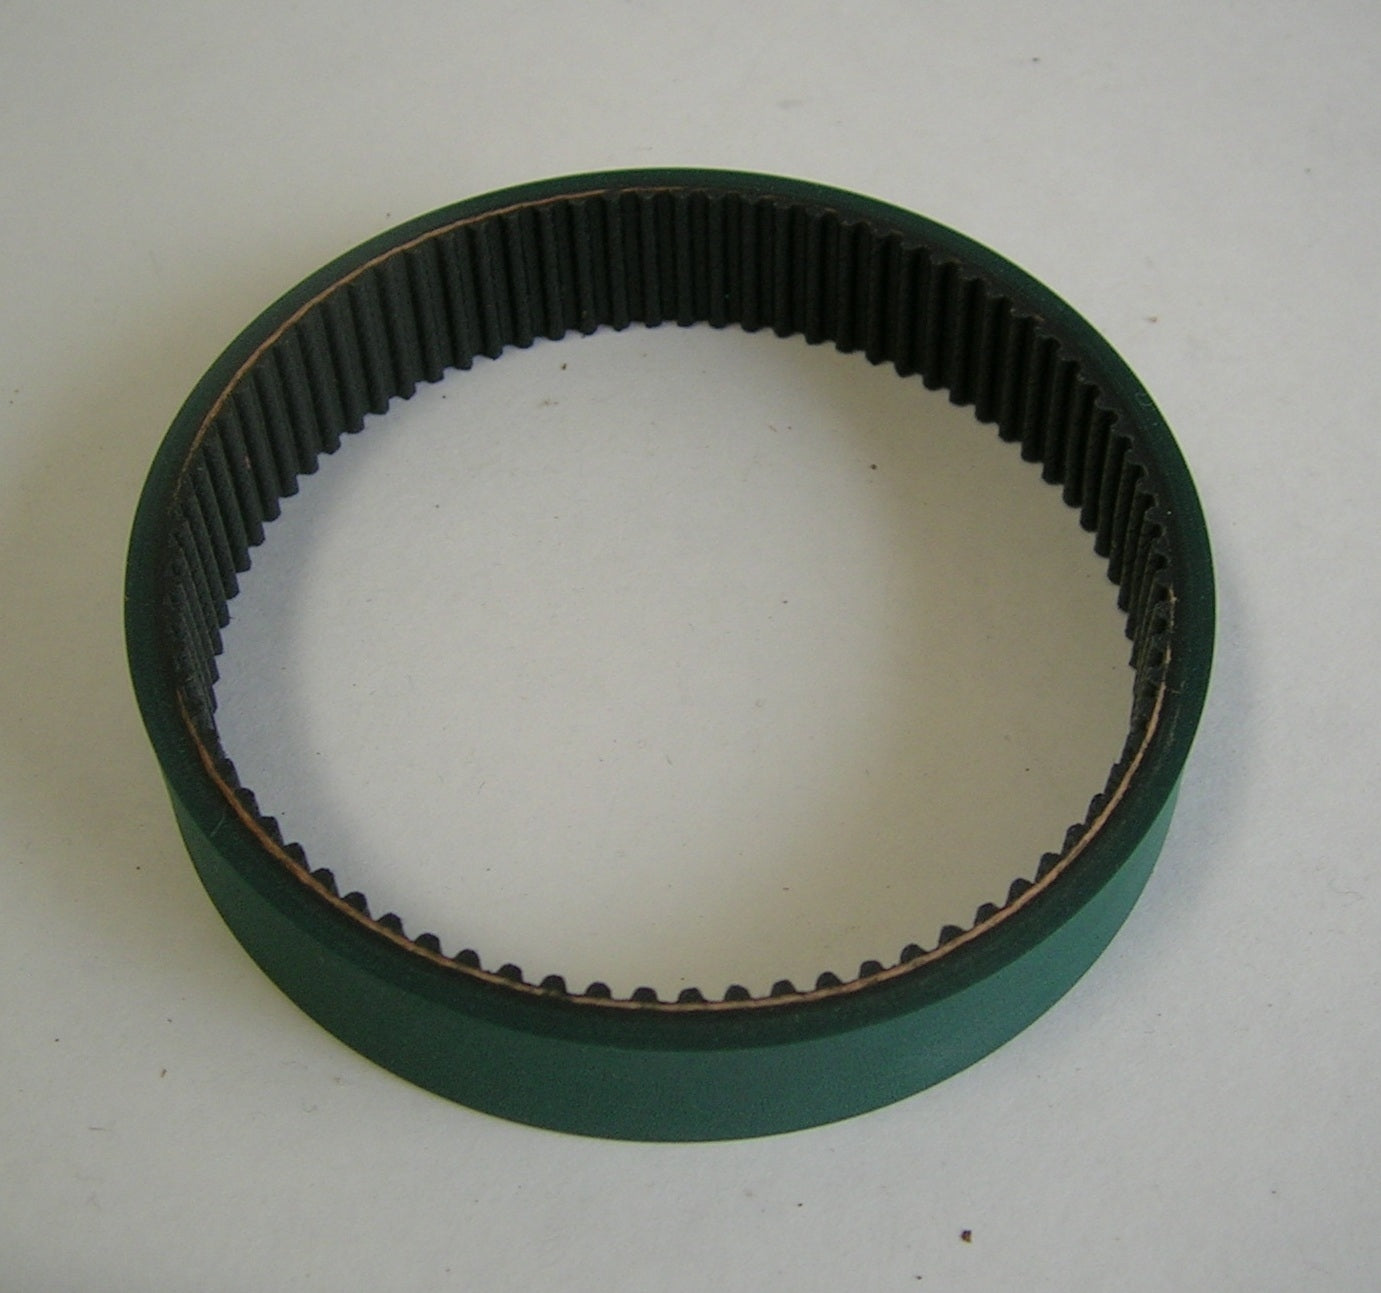 ES 9400 Toothed Replacement Grabber Feed Belt for Schleuniger ES9400 Green